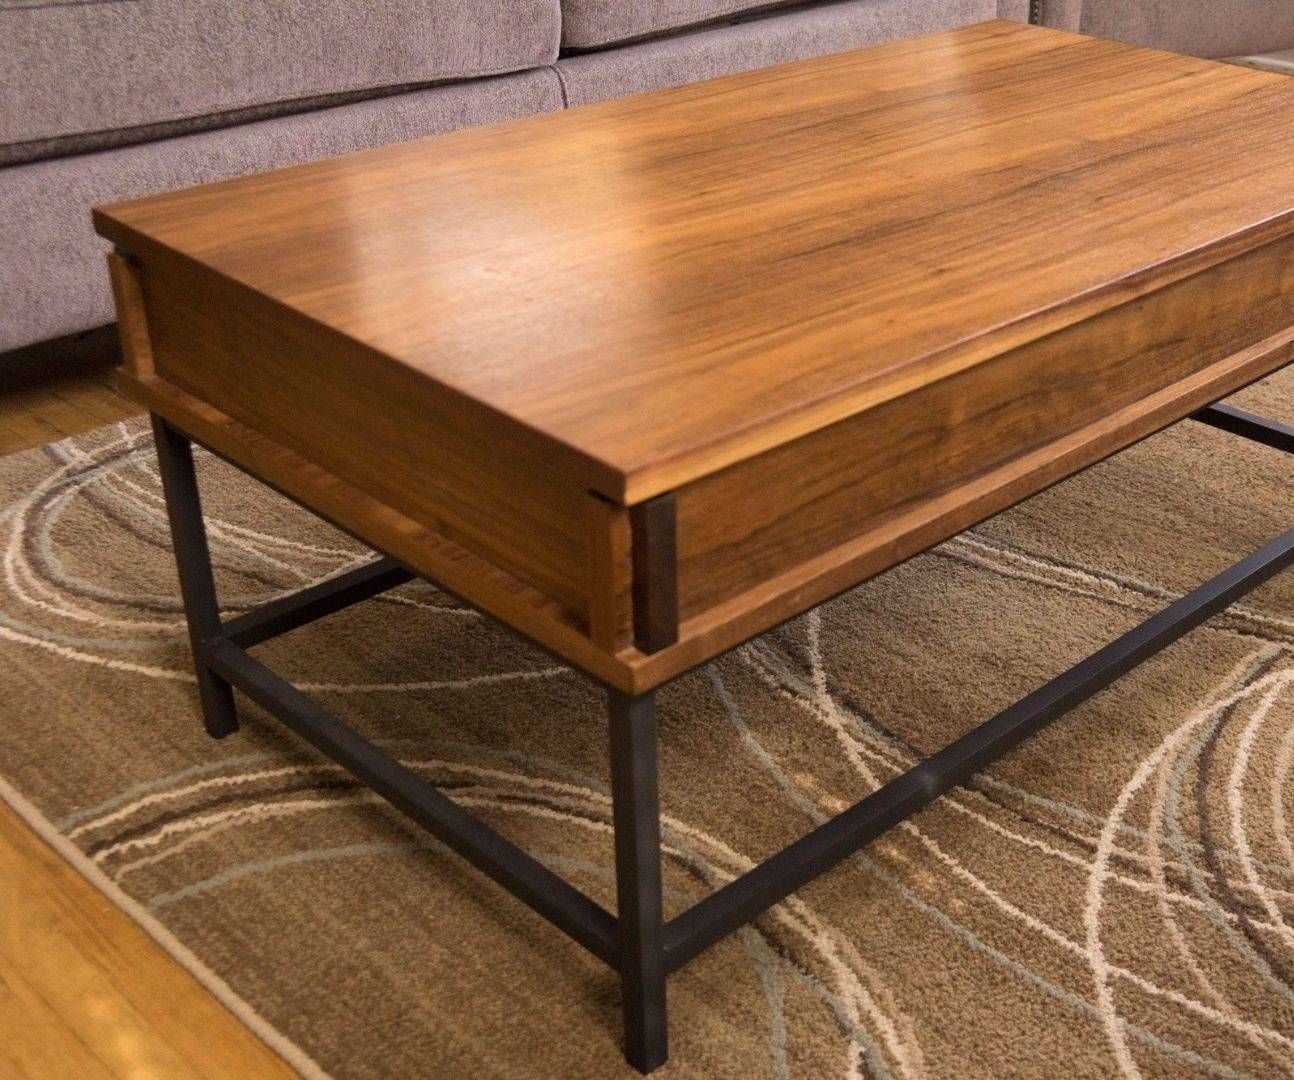 How To Make A Coffee Table With Lift Top: 18 Steps (with Pictures) With Hinged Top Coffee Tables (View 28 of 30)